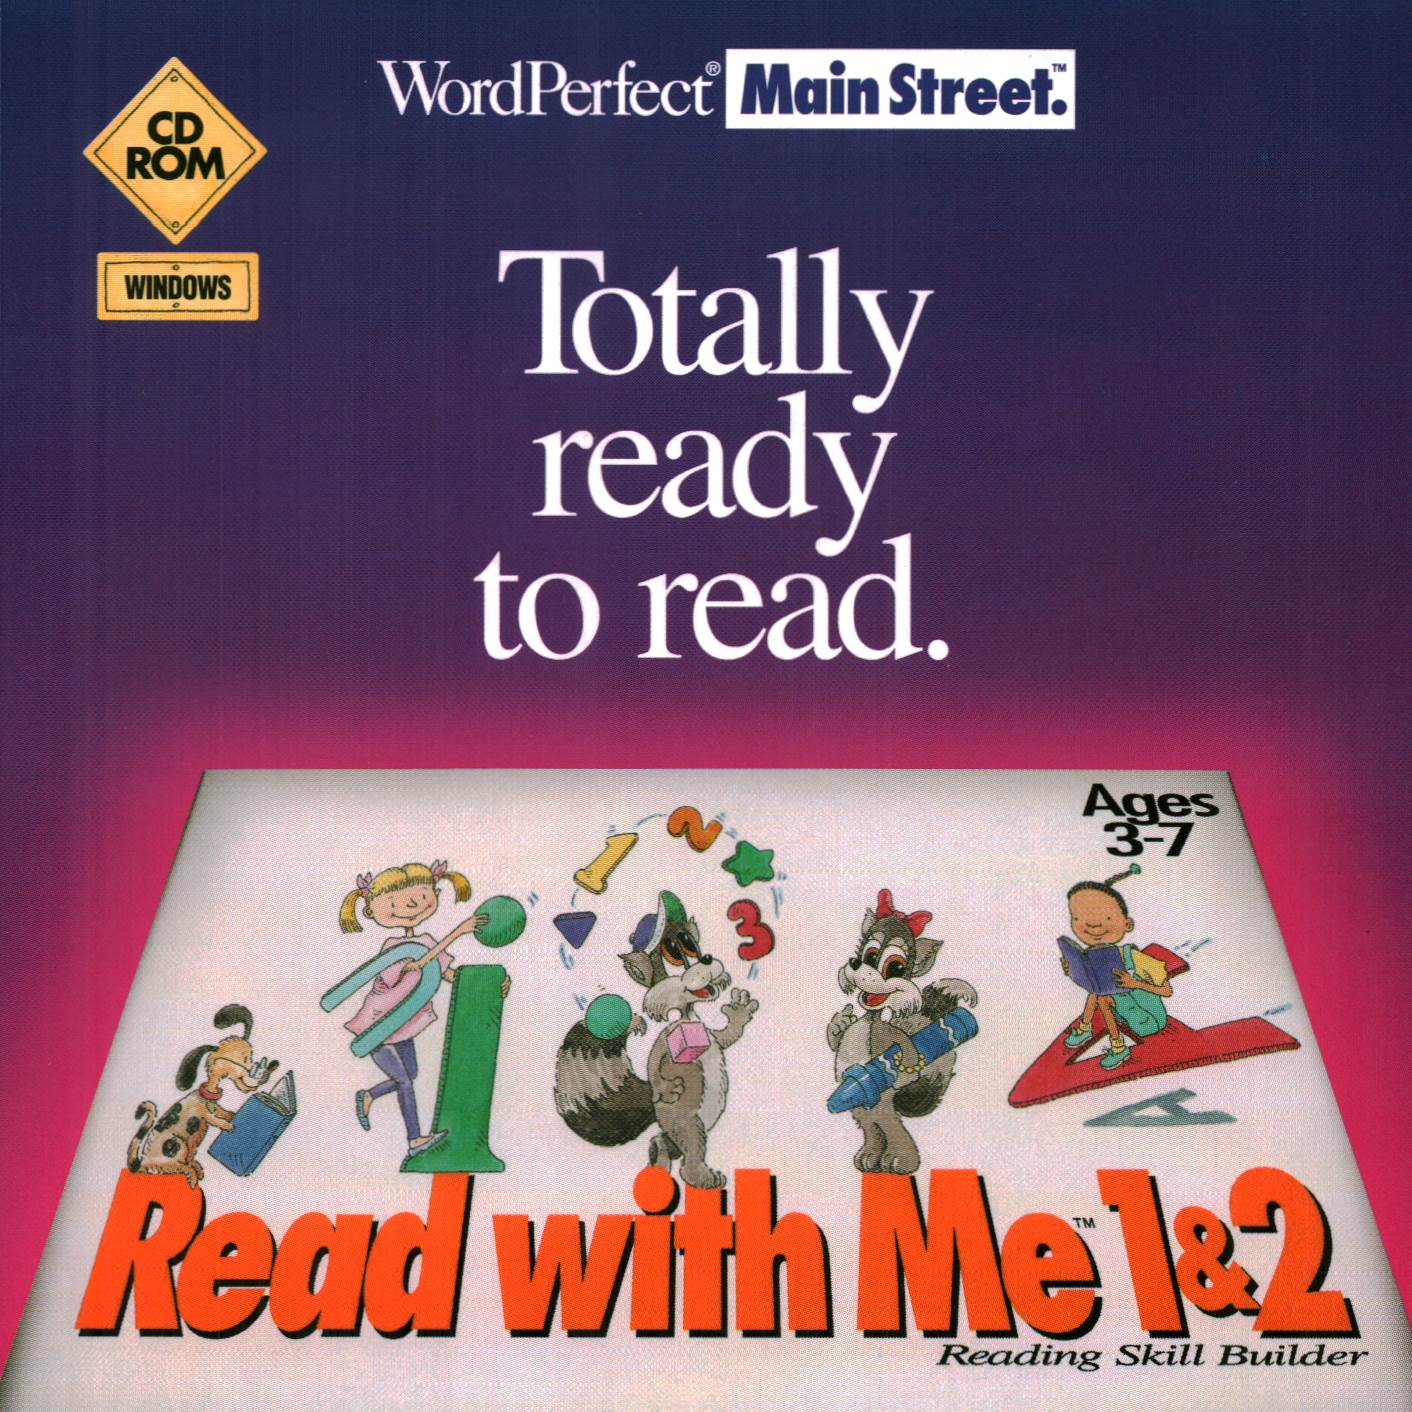 WordPerfect Read with Me 1&2